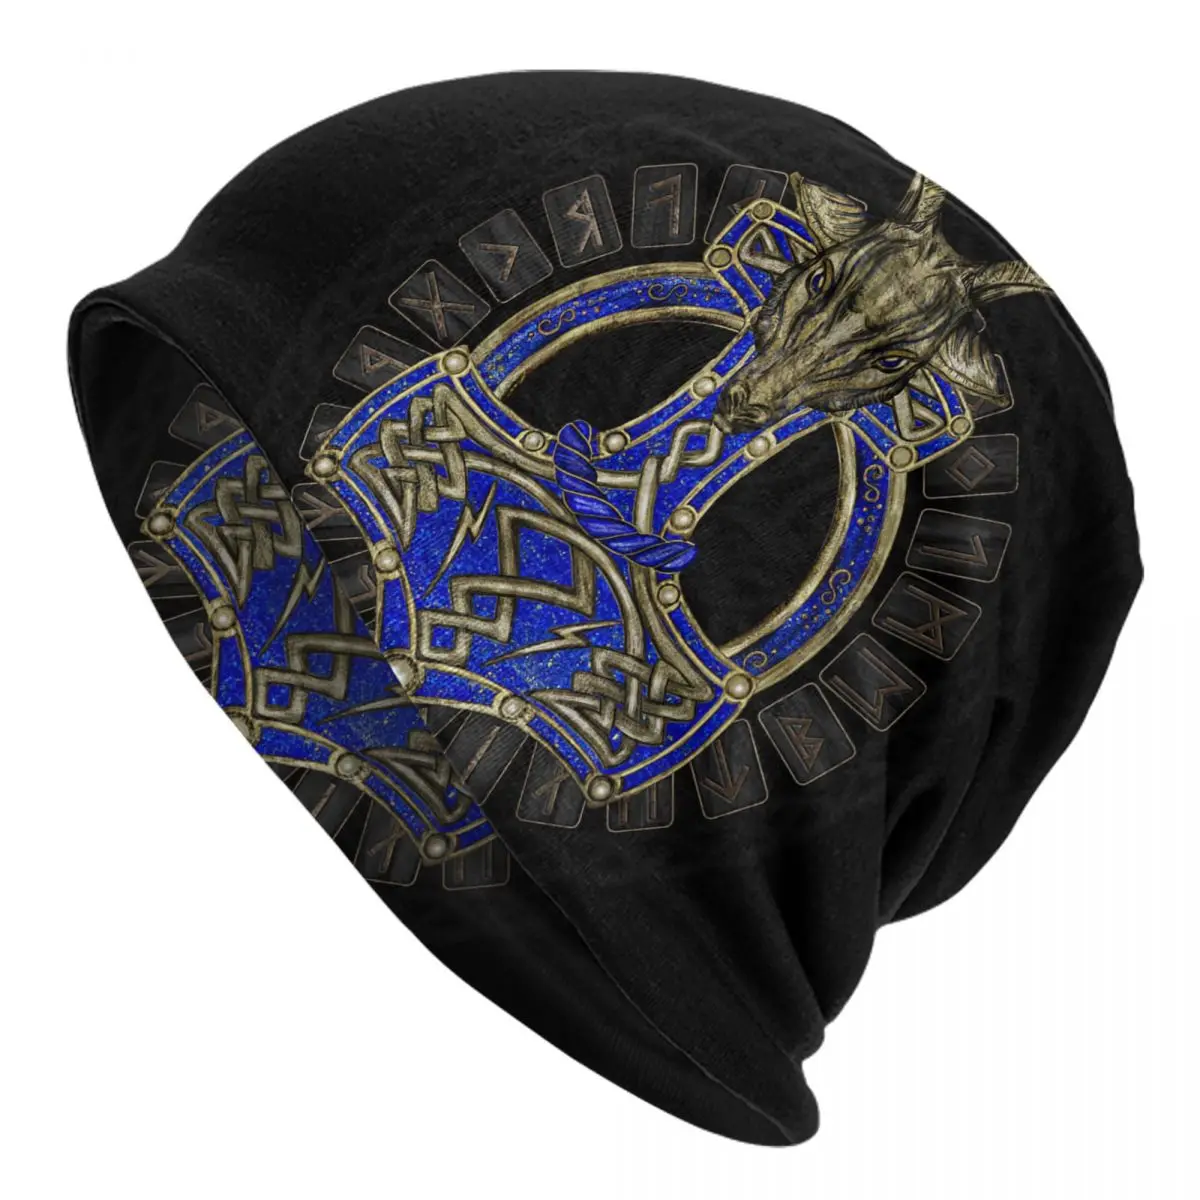 The Hammer Of Thor - Gold And Lapis Lazuli Adult Men's Women's Knit Hat Keep warm winter knitted hat